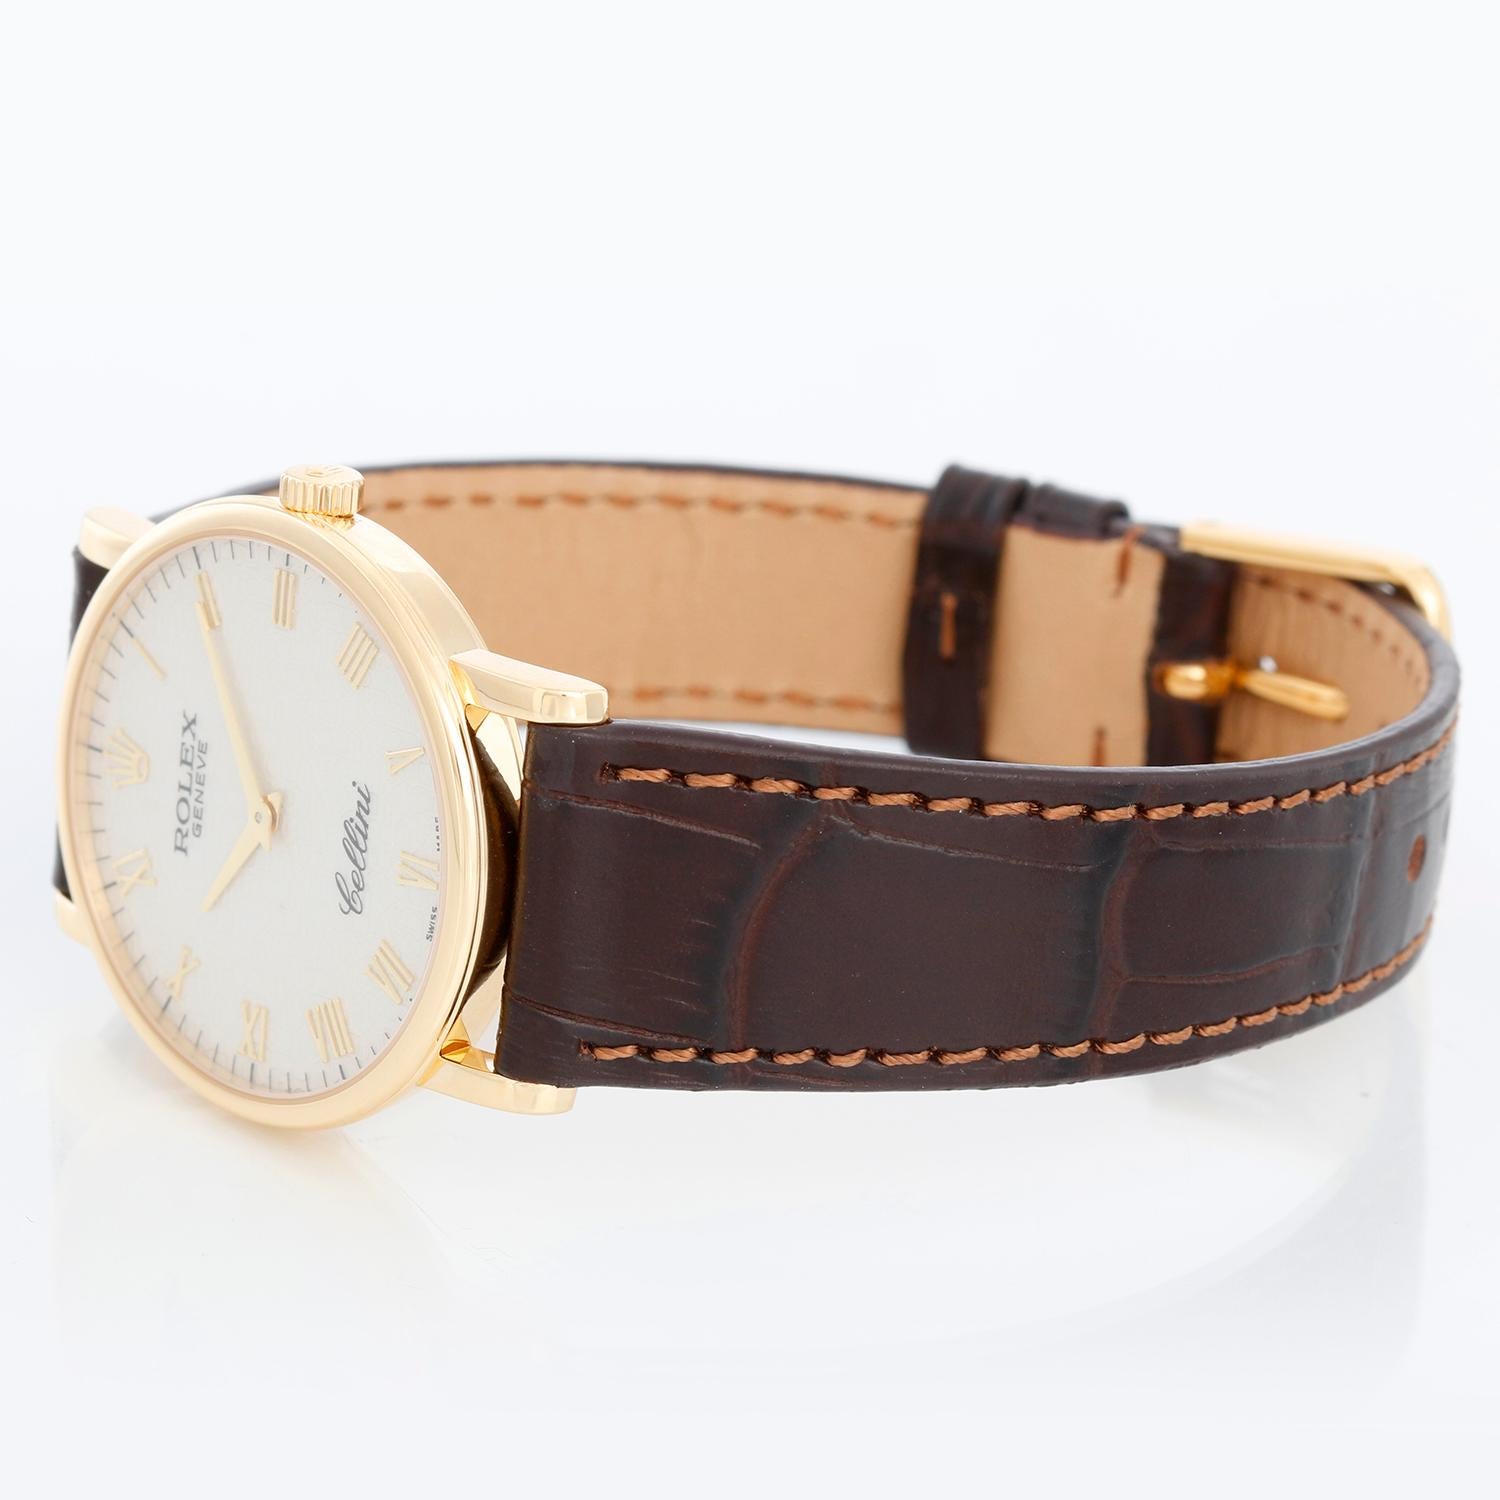 Rolex Cellini Classic 18k Yellow Gold Men's Watch 5115 - Manual winding. 18k yellow gold case (32 mm). Unusual White jubilee dial. Brown leather strap band with tang buckle . Pre-owned with Cellini box.